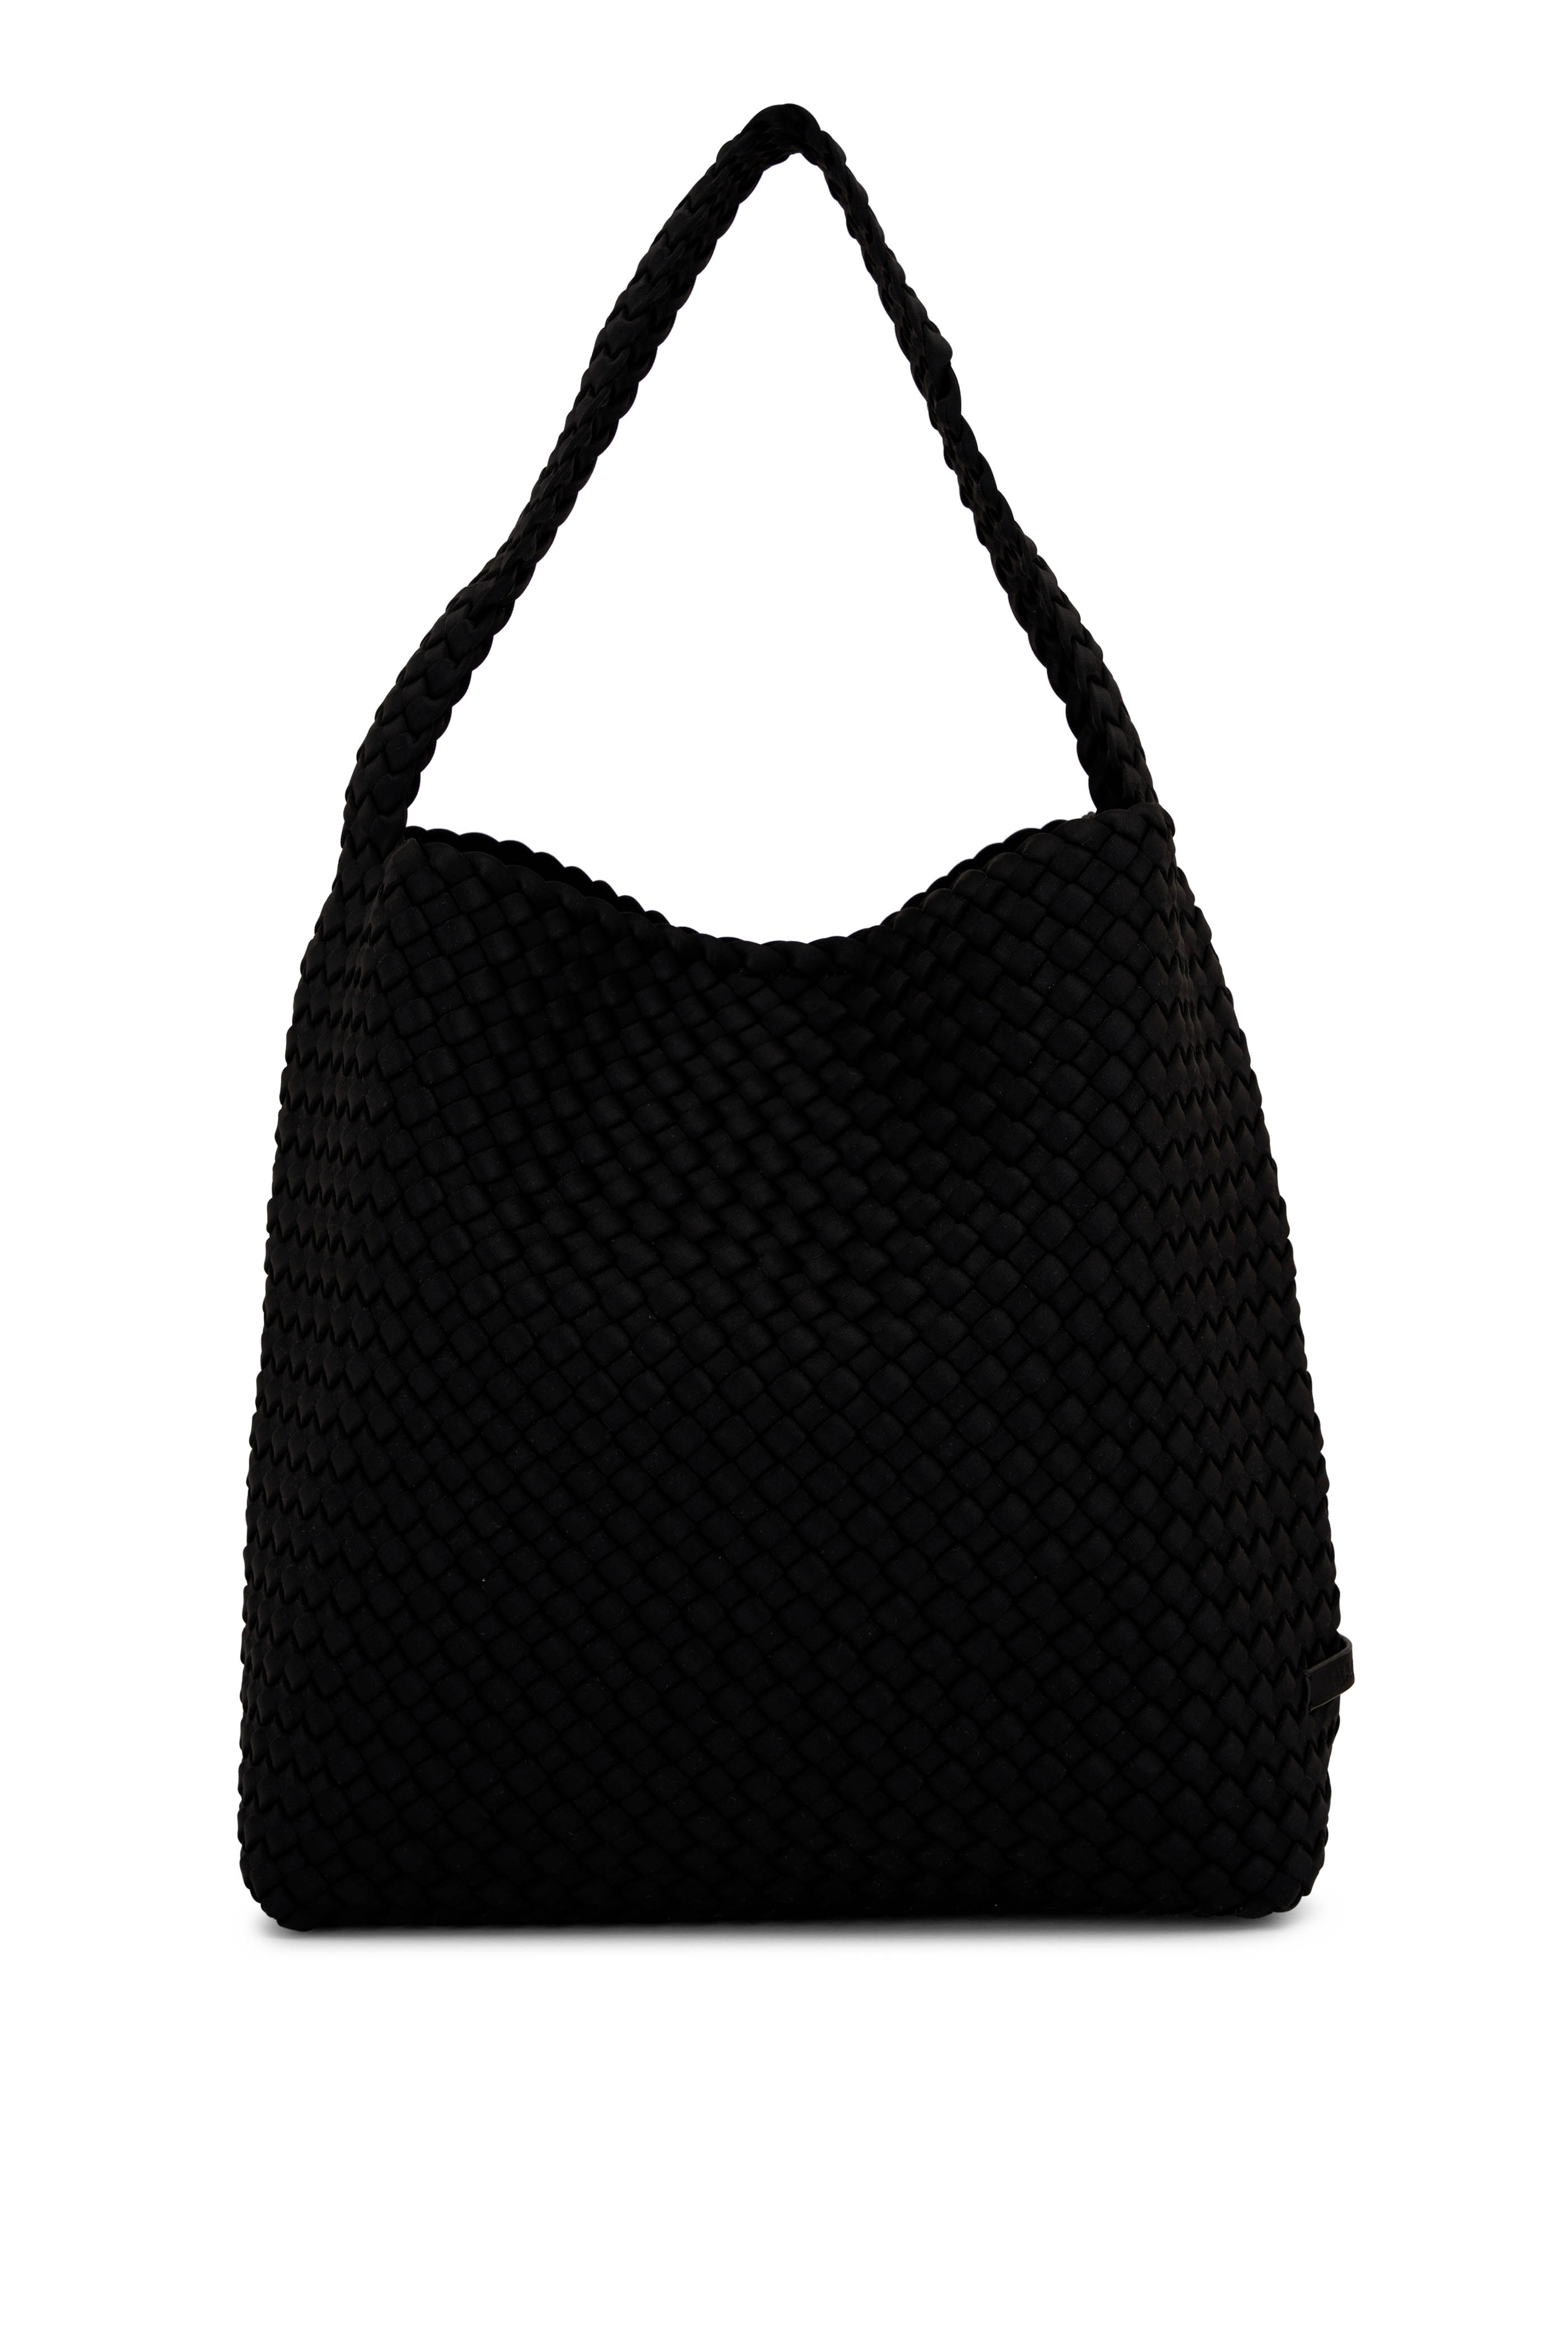 DIAMOND SOFT HOBO/M, Black Soft Calf Leather Hobo Bag with Chain Strap, Spring 2023 collection